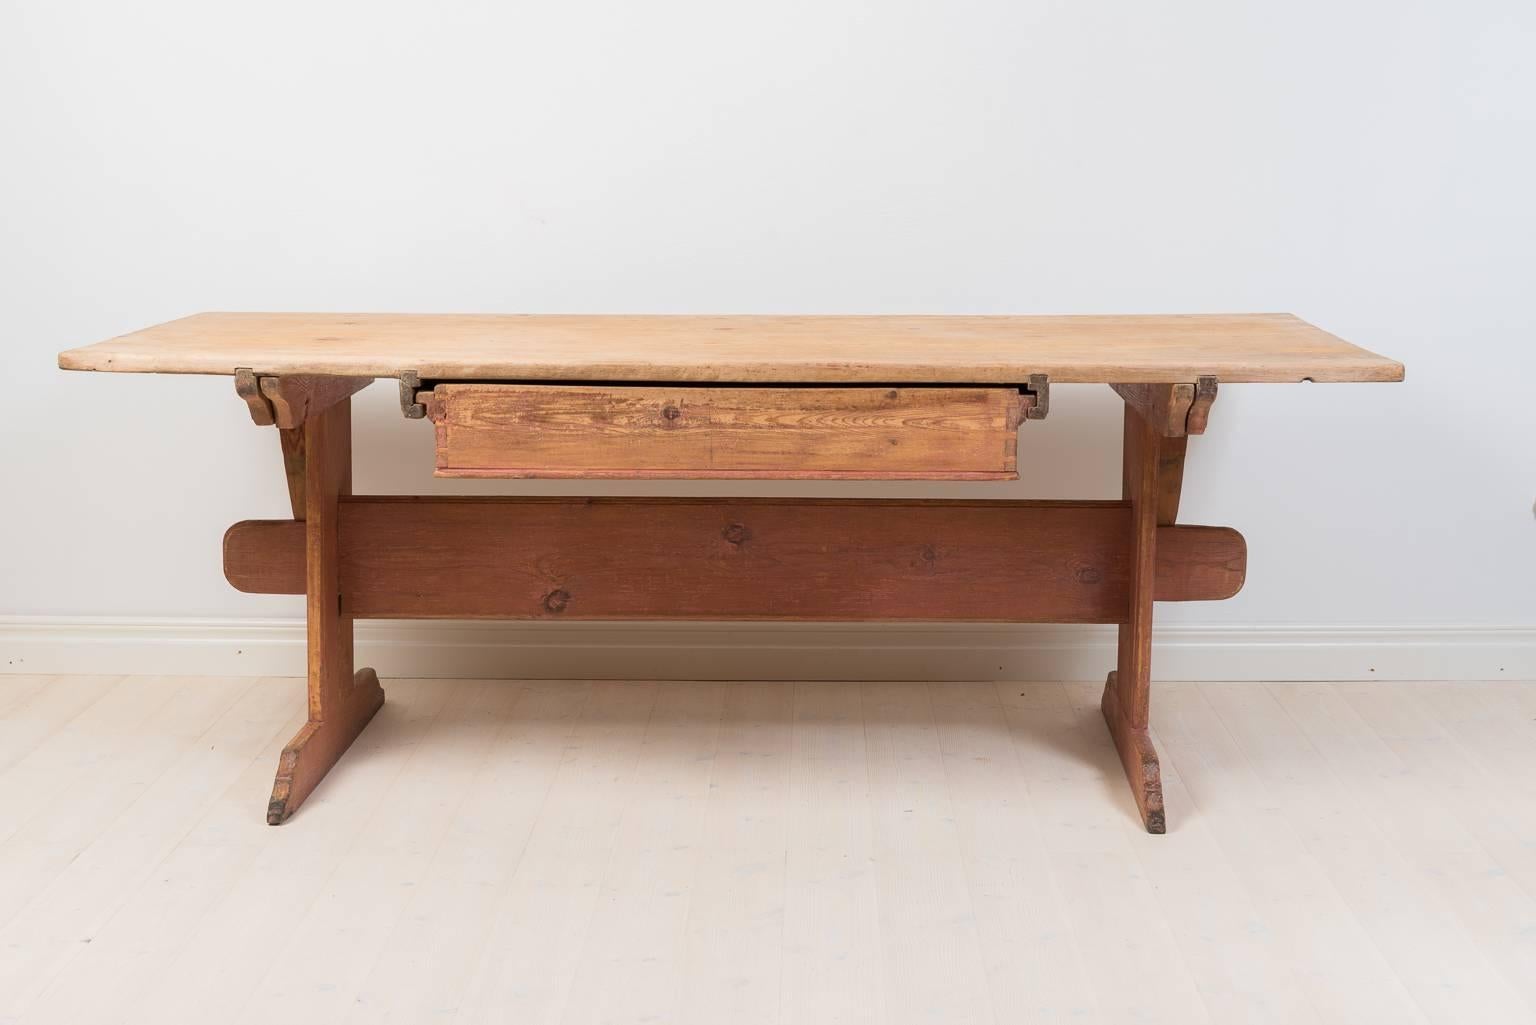 Swedish Farm House Table from the 1800s with Original Patina 2